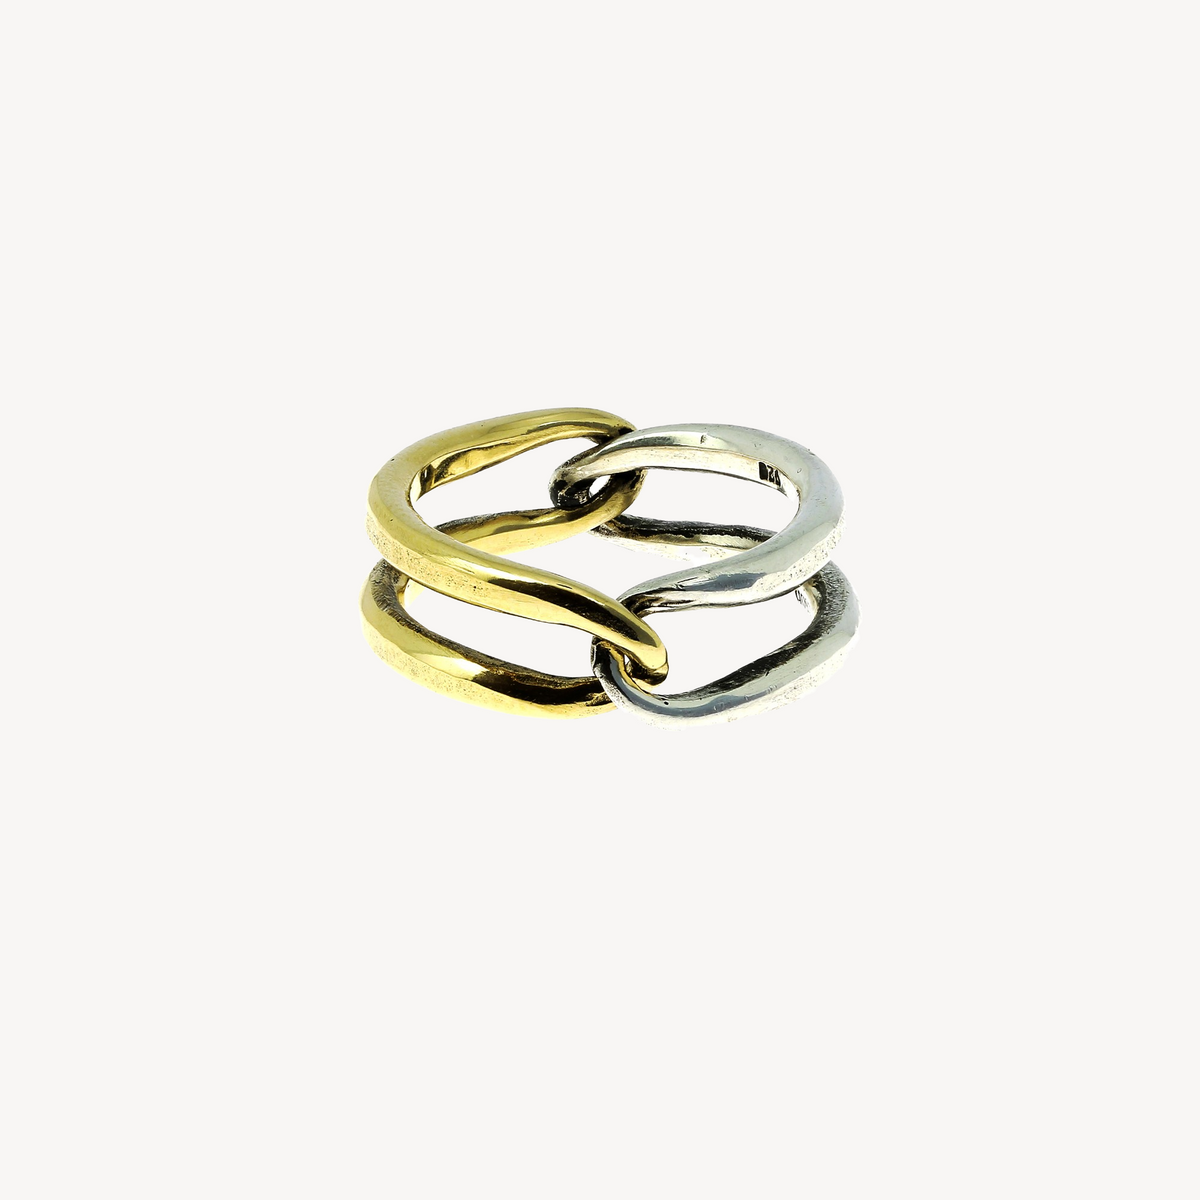 Tension Ring Silver and Gold